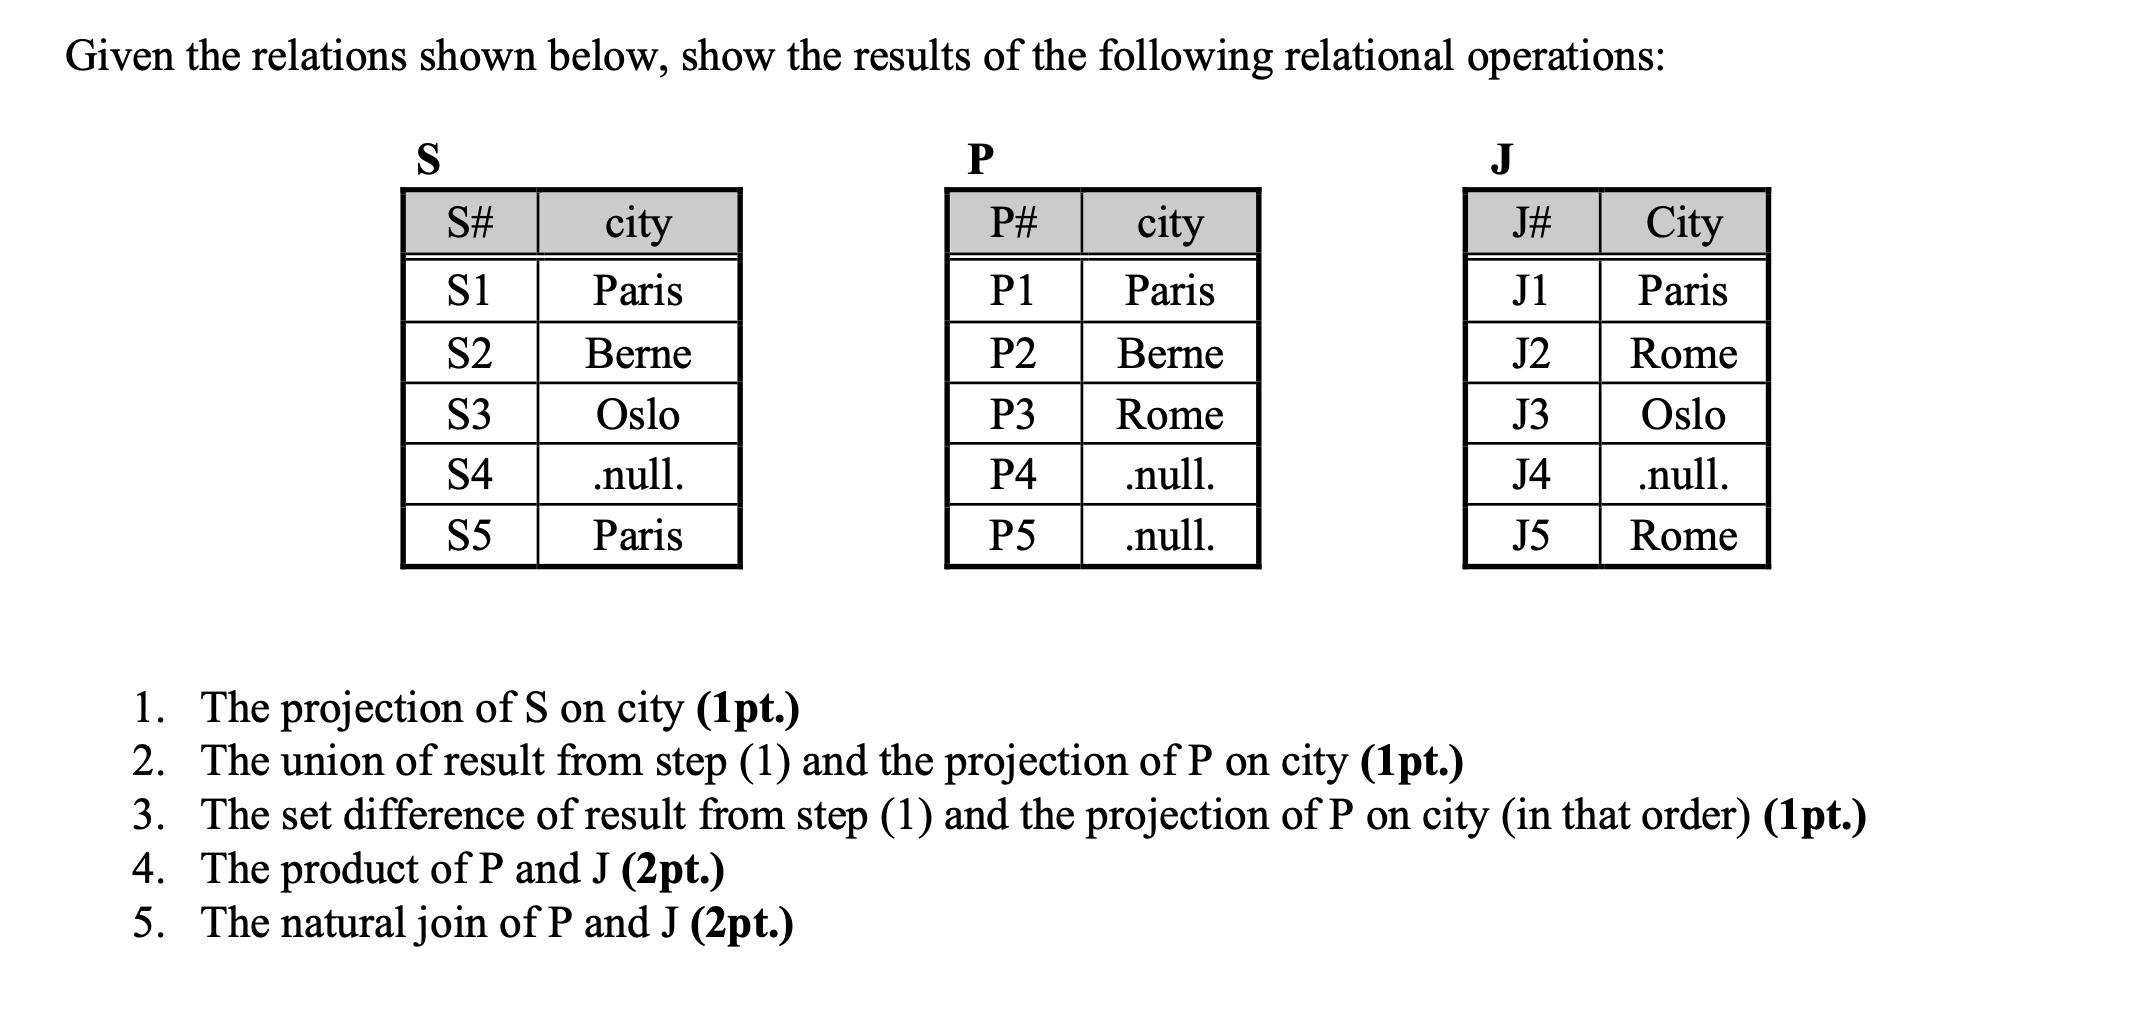 Given the relations shown below, show the results of the following relational operations: S S# $1 S2 S3 S4 S5